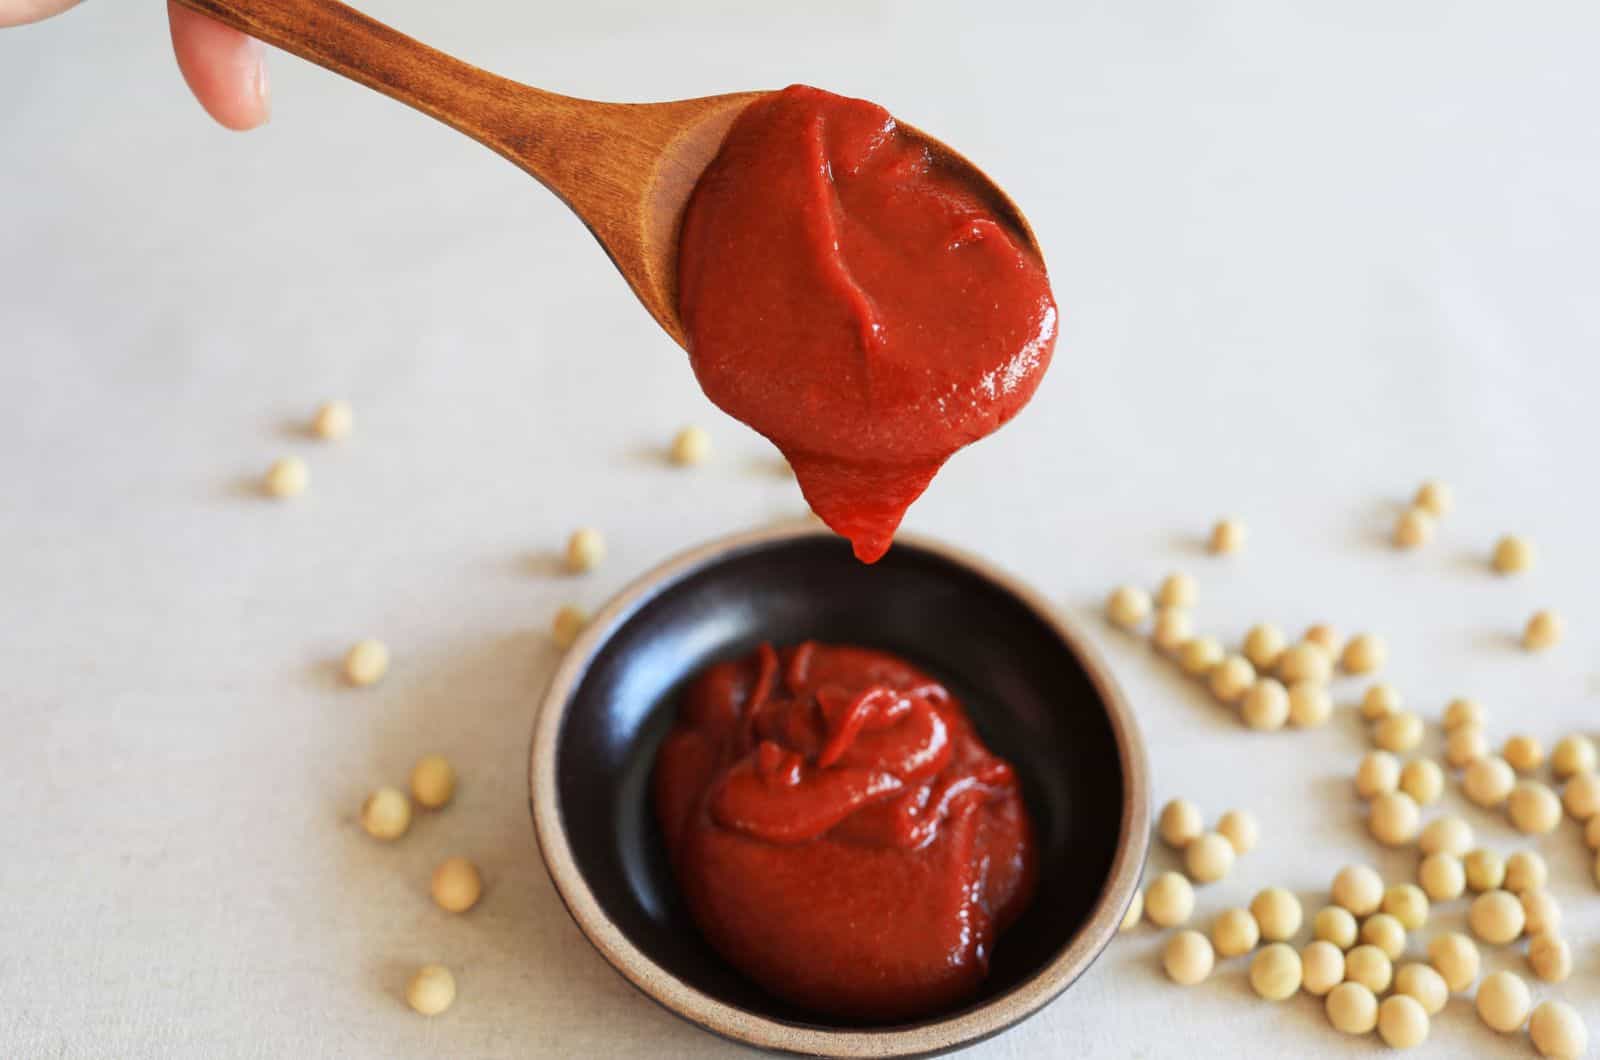 Korean food Gochujang(red pepper paste) is poured from a wooden spoon into a jar